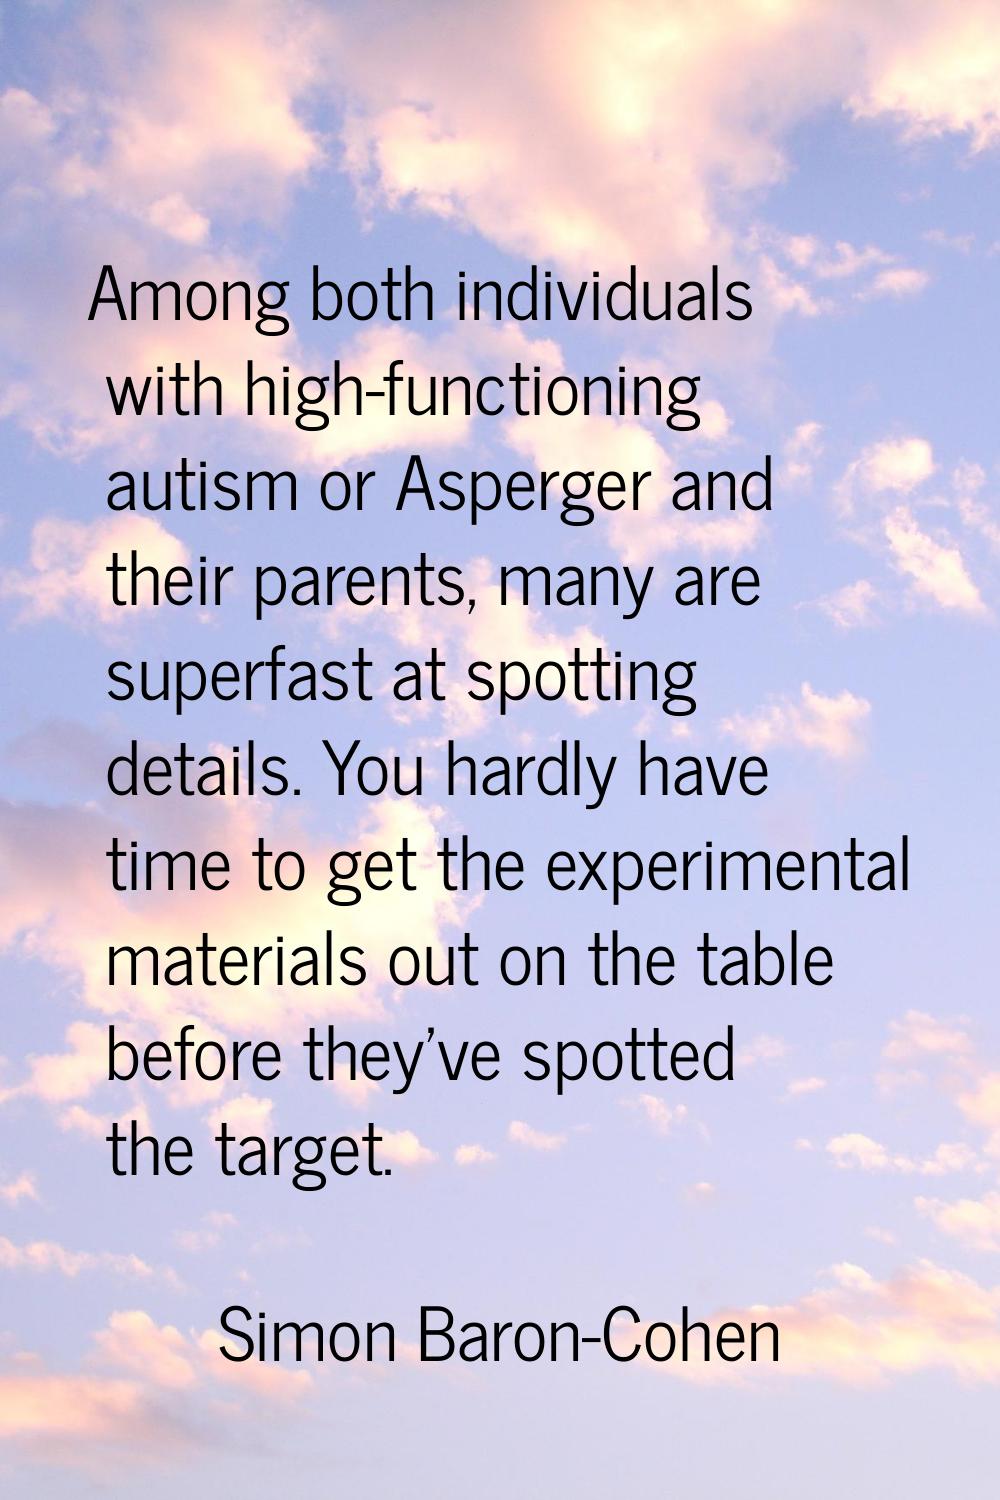 Among both individuals with high-functioning autism or Asperger and their parents, many are superfa